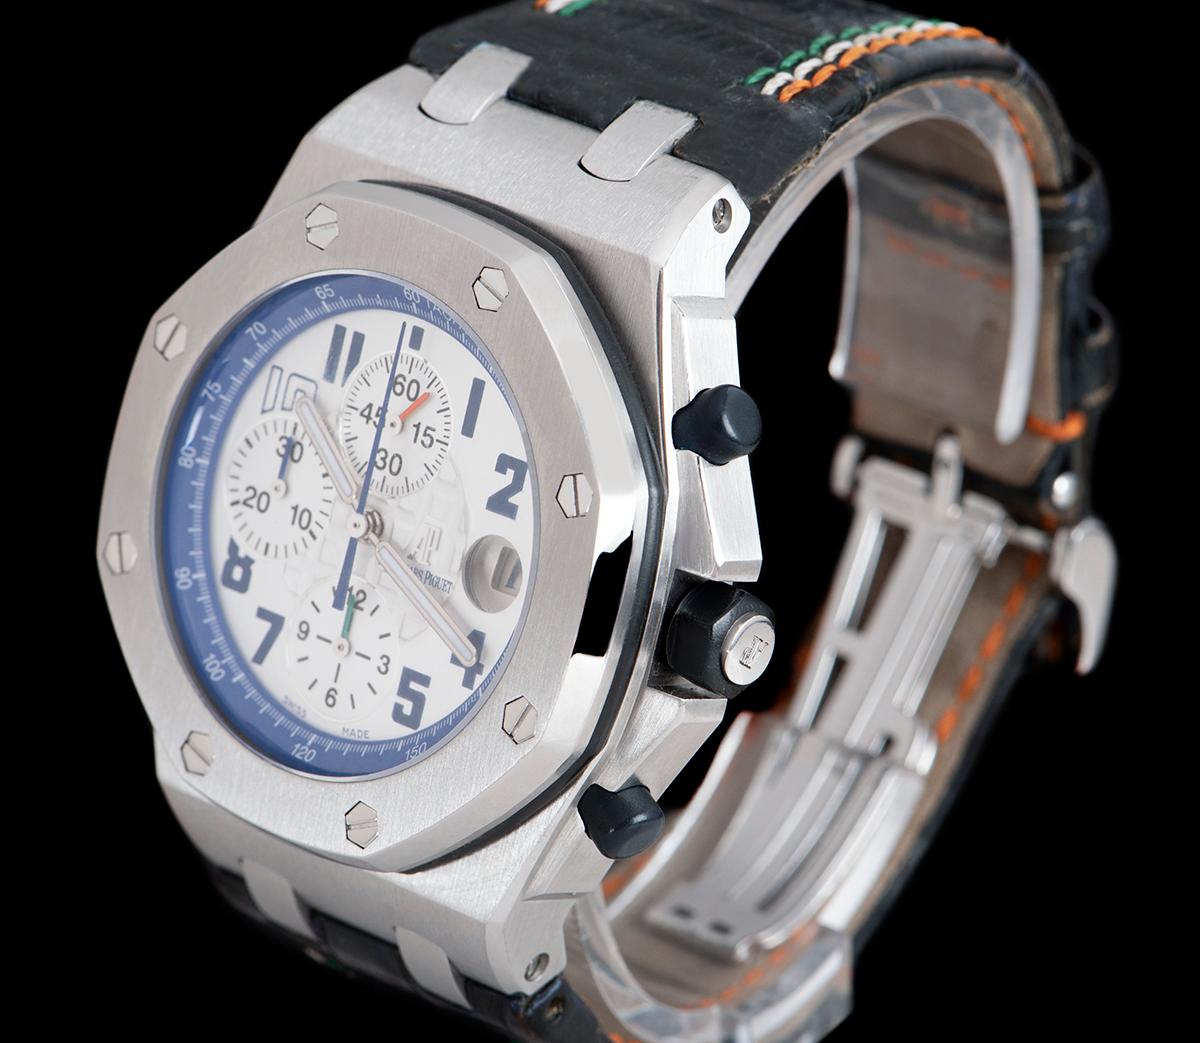 A Limited Edition Stainless Steel Royal Oak Offshore Sachin Tendulkar Gents Wristwatch, silver dial with applied arabic numbers, date at 3 0'clock, 12 hour recorder at 6 0'clock, 30 minute recorder at 9 0'clock, small seconds at 12 0'clock,